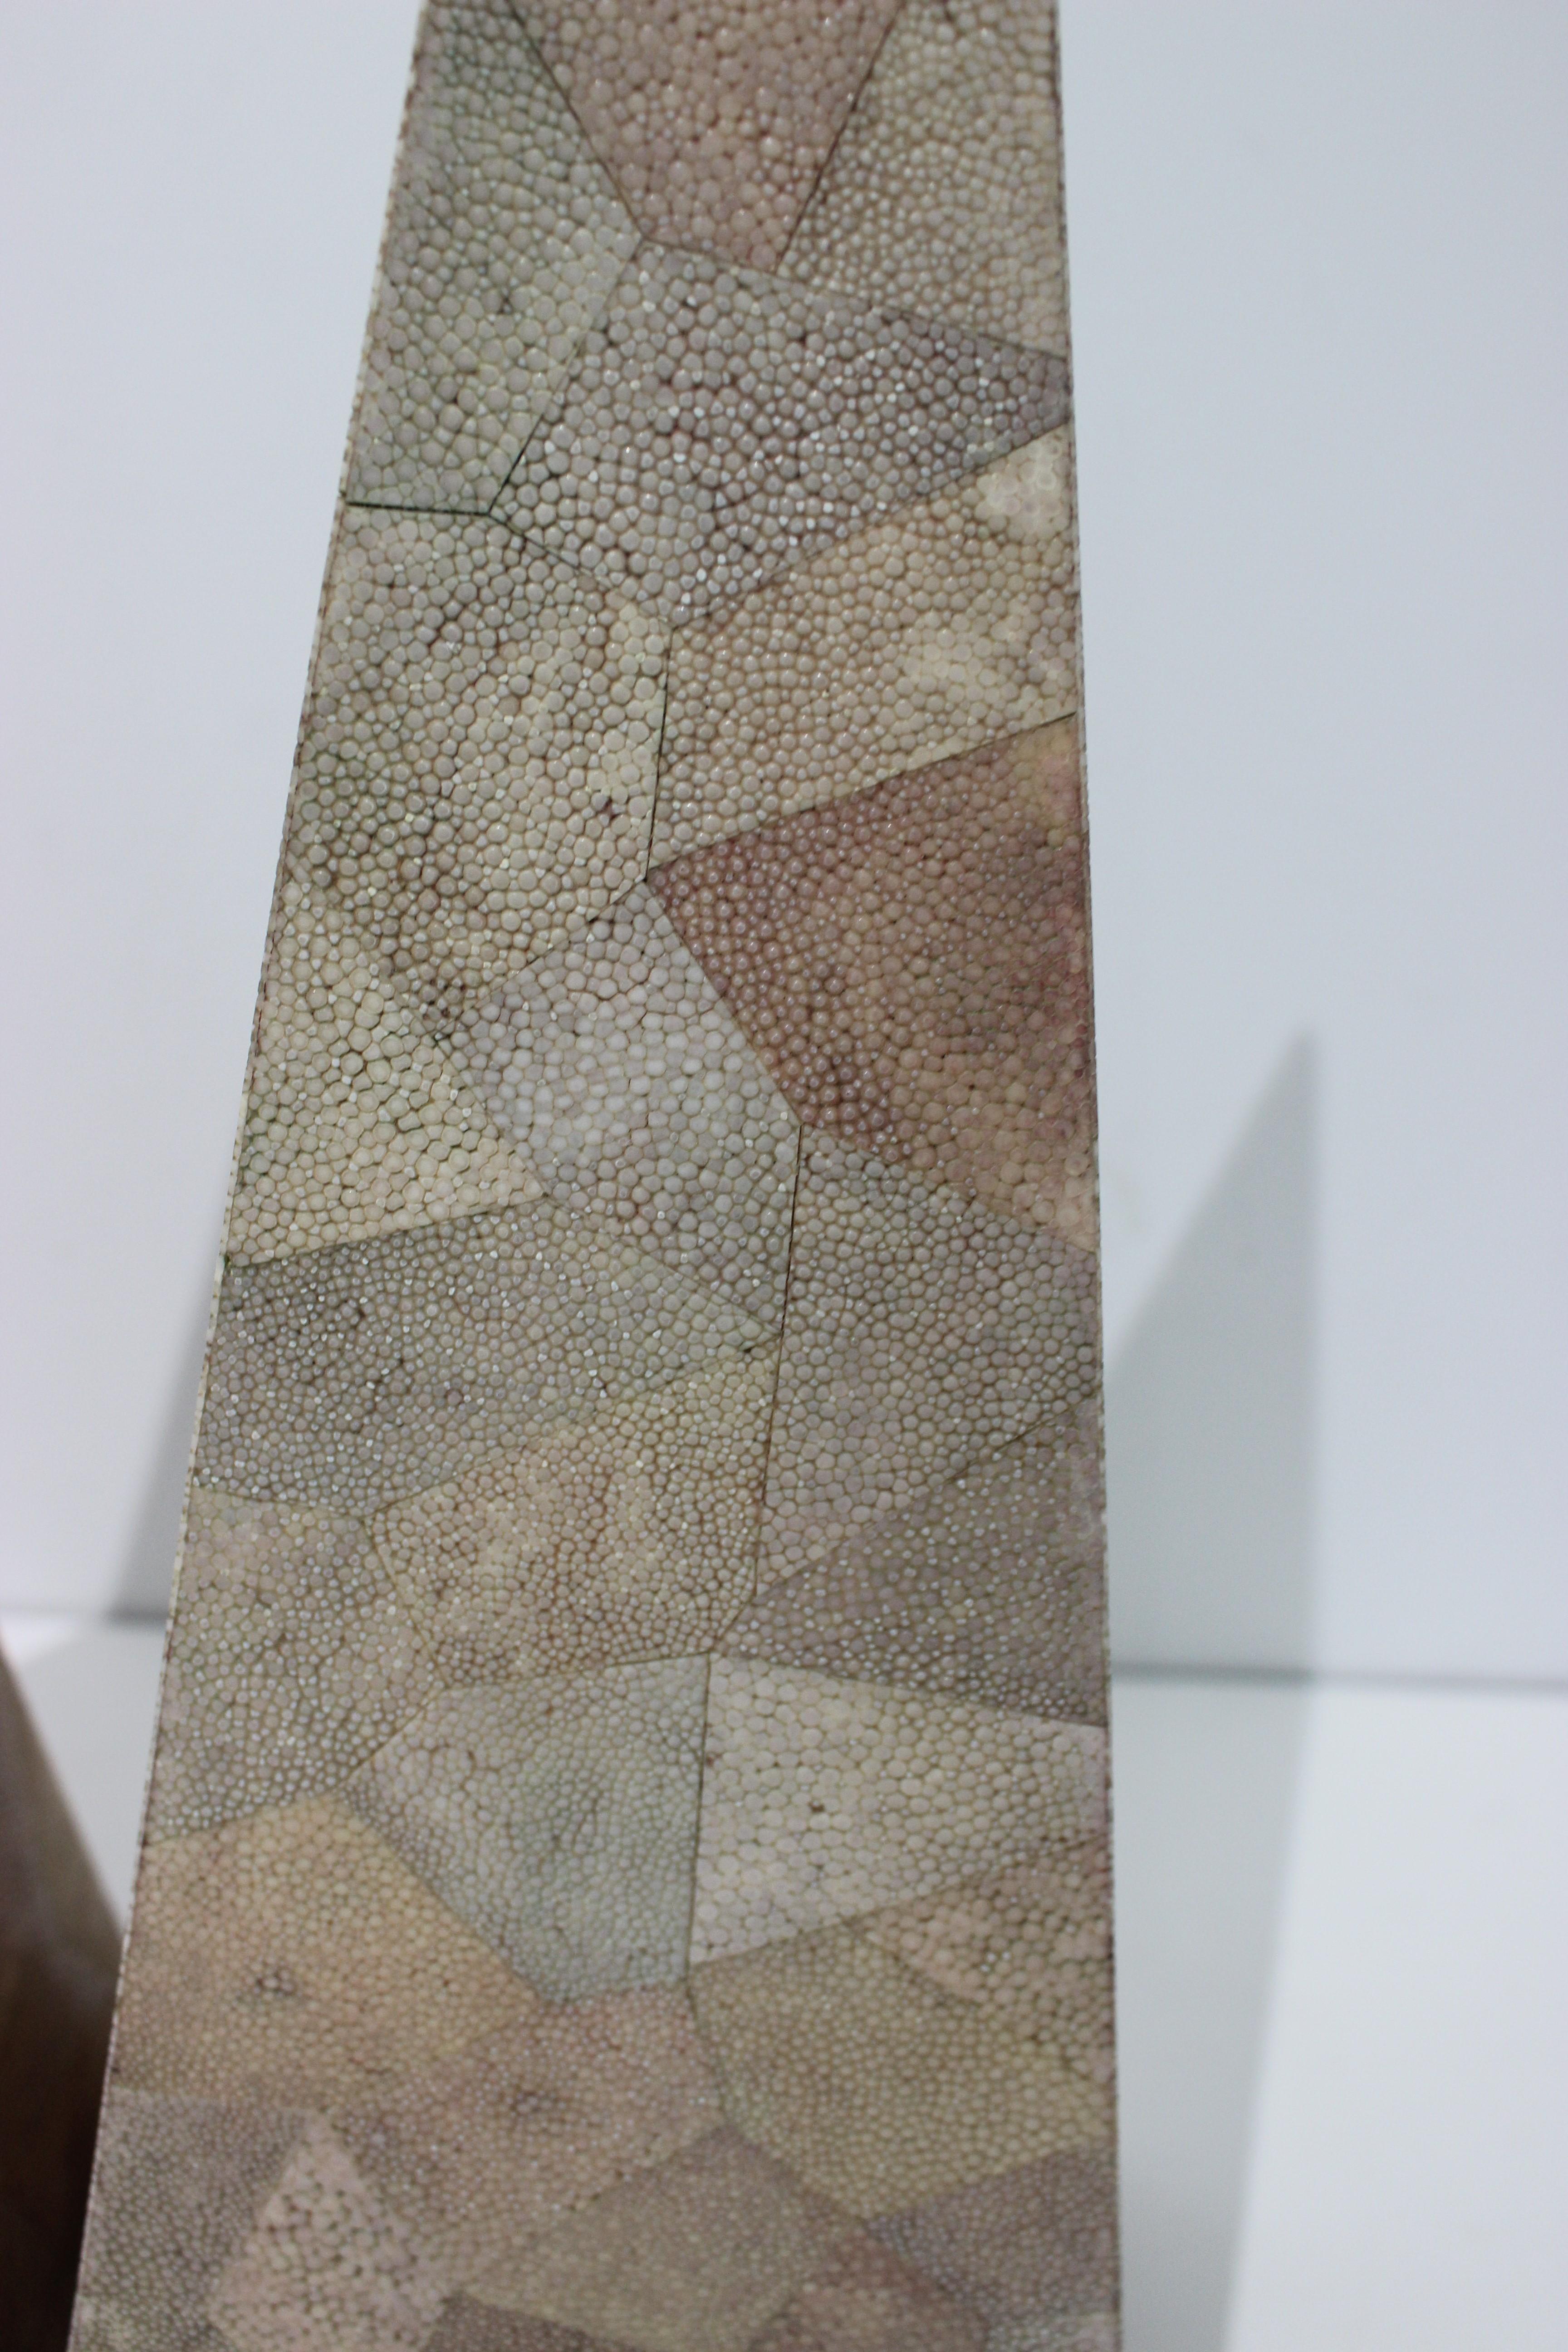 Maitland-Smith Shagreen Obelisks, a Set of 2 In Good Condition For Sale In West Palm Beach, FL